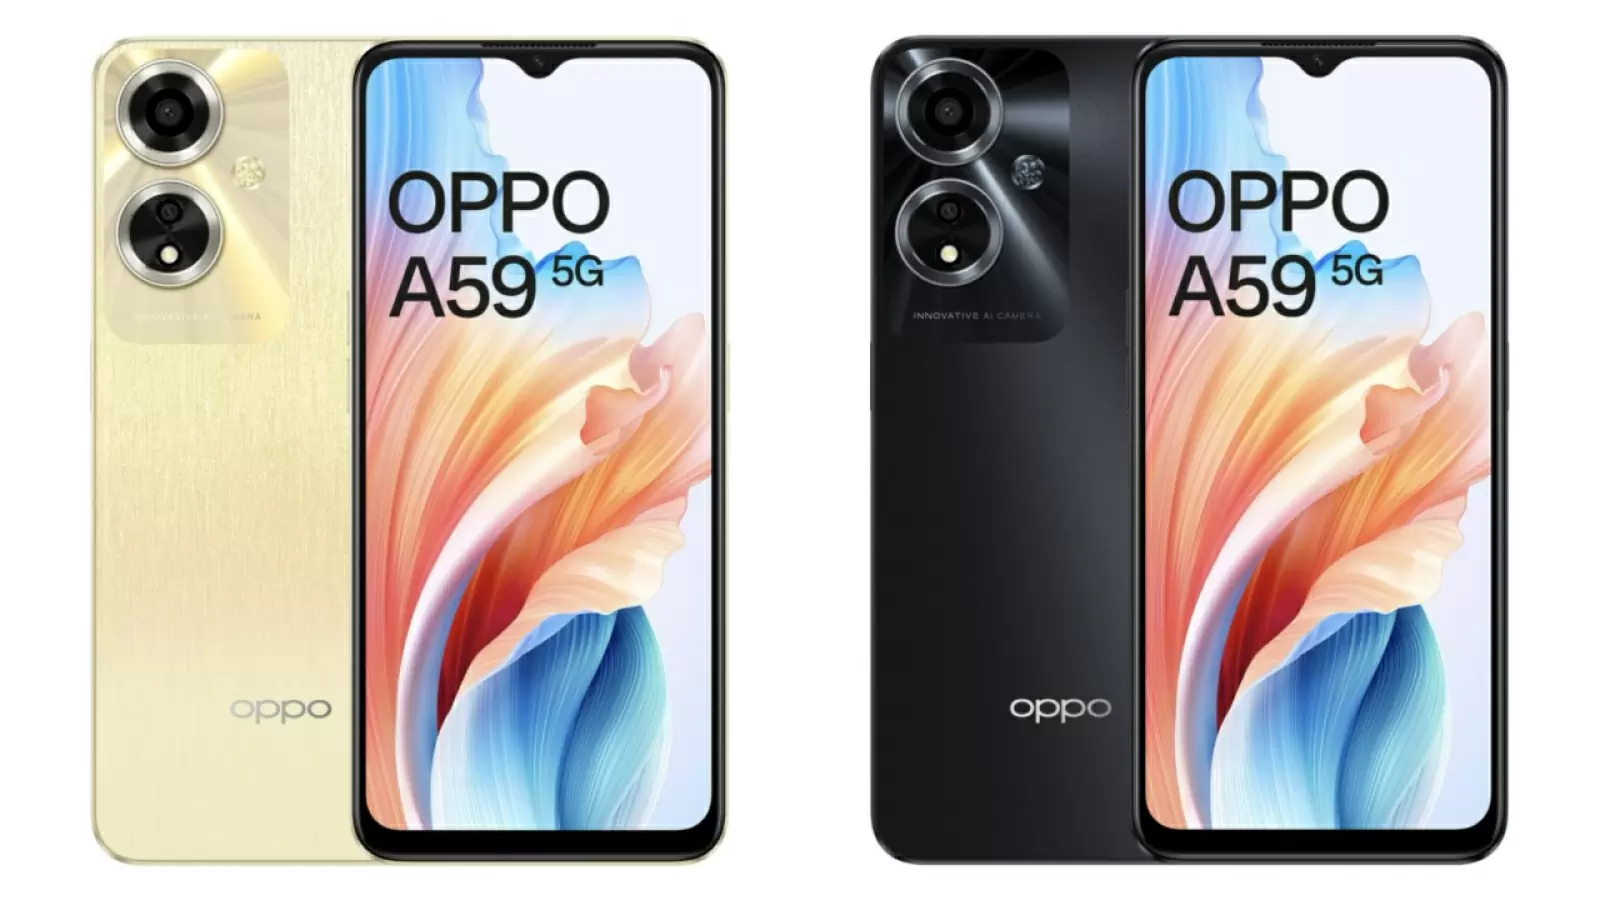 Oppo phone with 5000mAh battery and 128GB storage has become cheaper, know the offers and details here